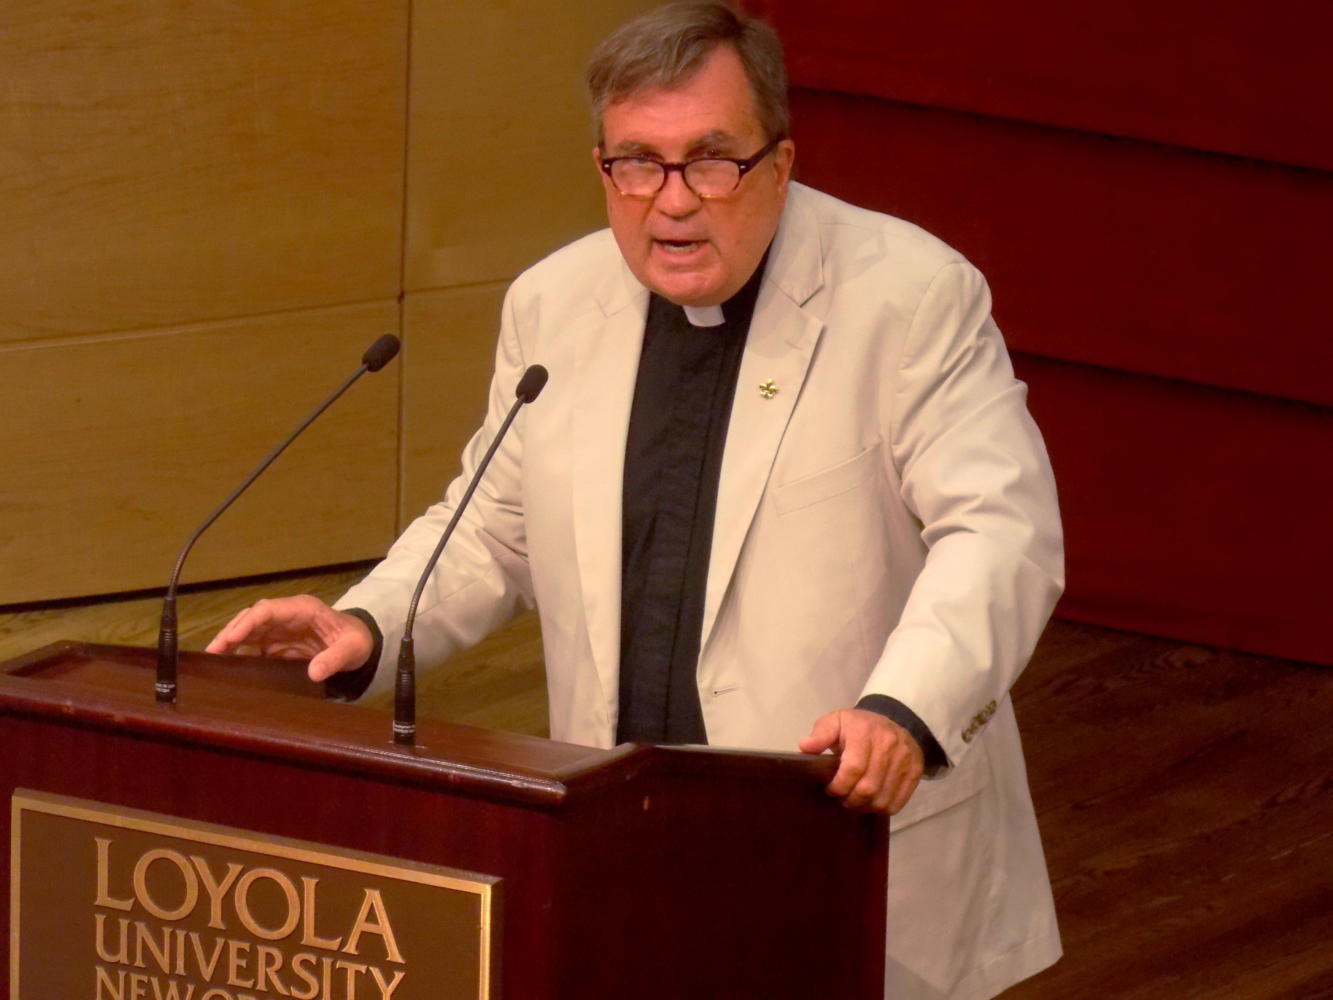 The Rev. Kevin Wildes, S.J., university president, addresses faculty at a convocation. Photo credit: The Maroon